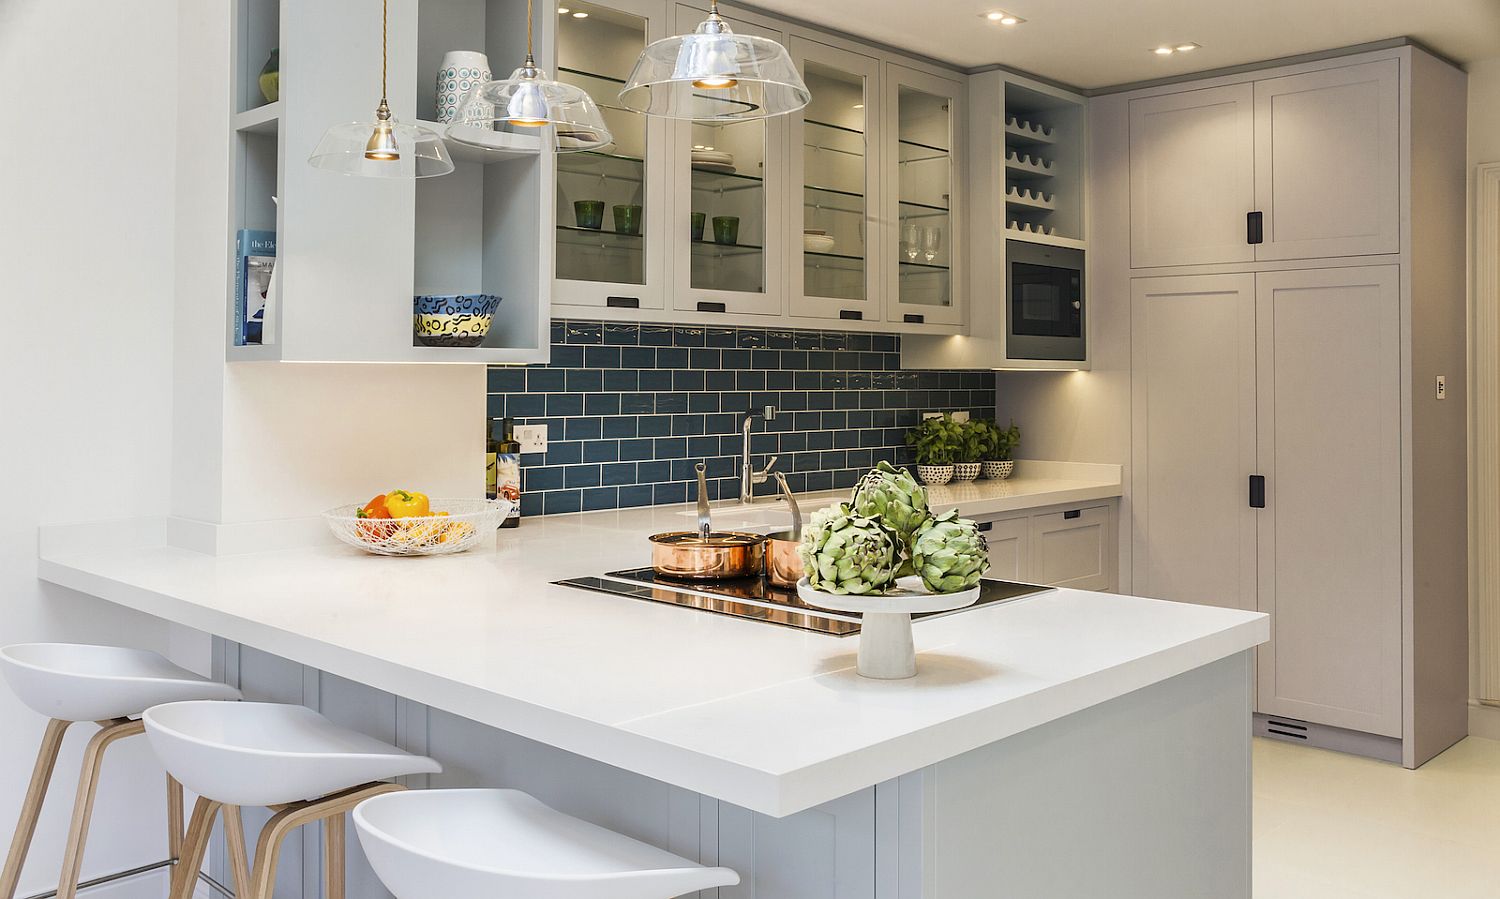 Subway-Tile-Backsplash-adds-color-to-the-kitchen-in-white